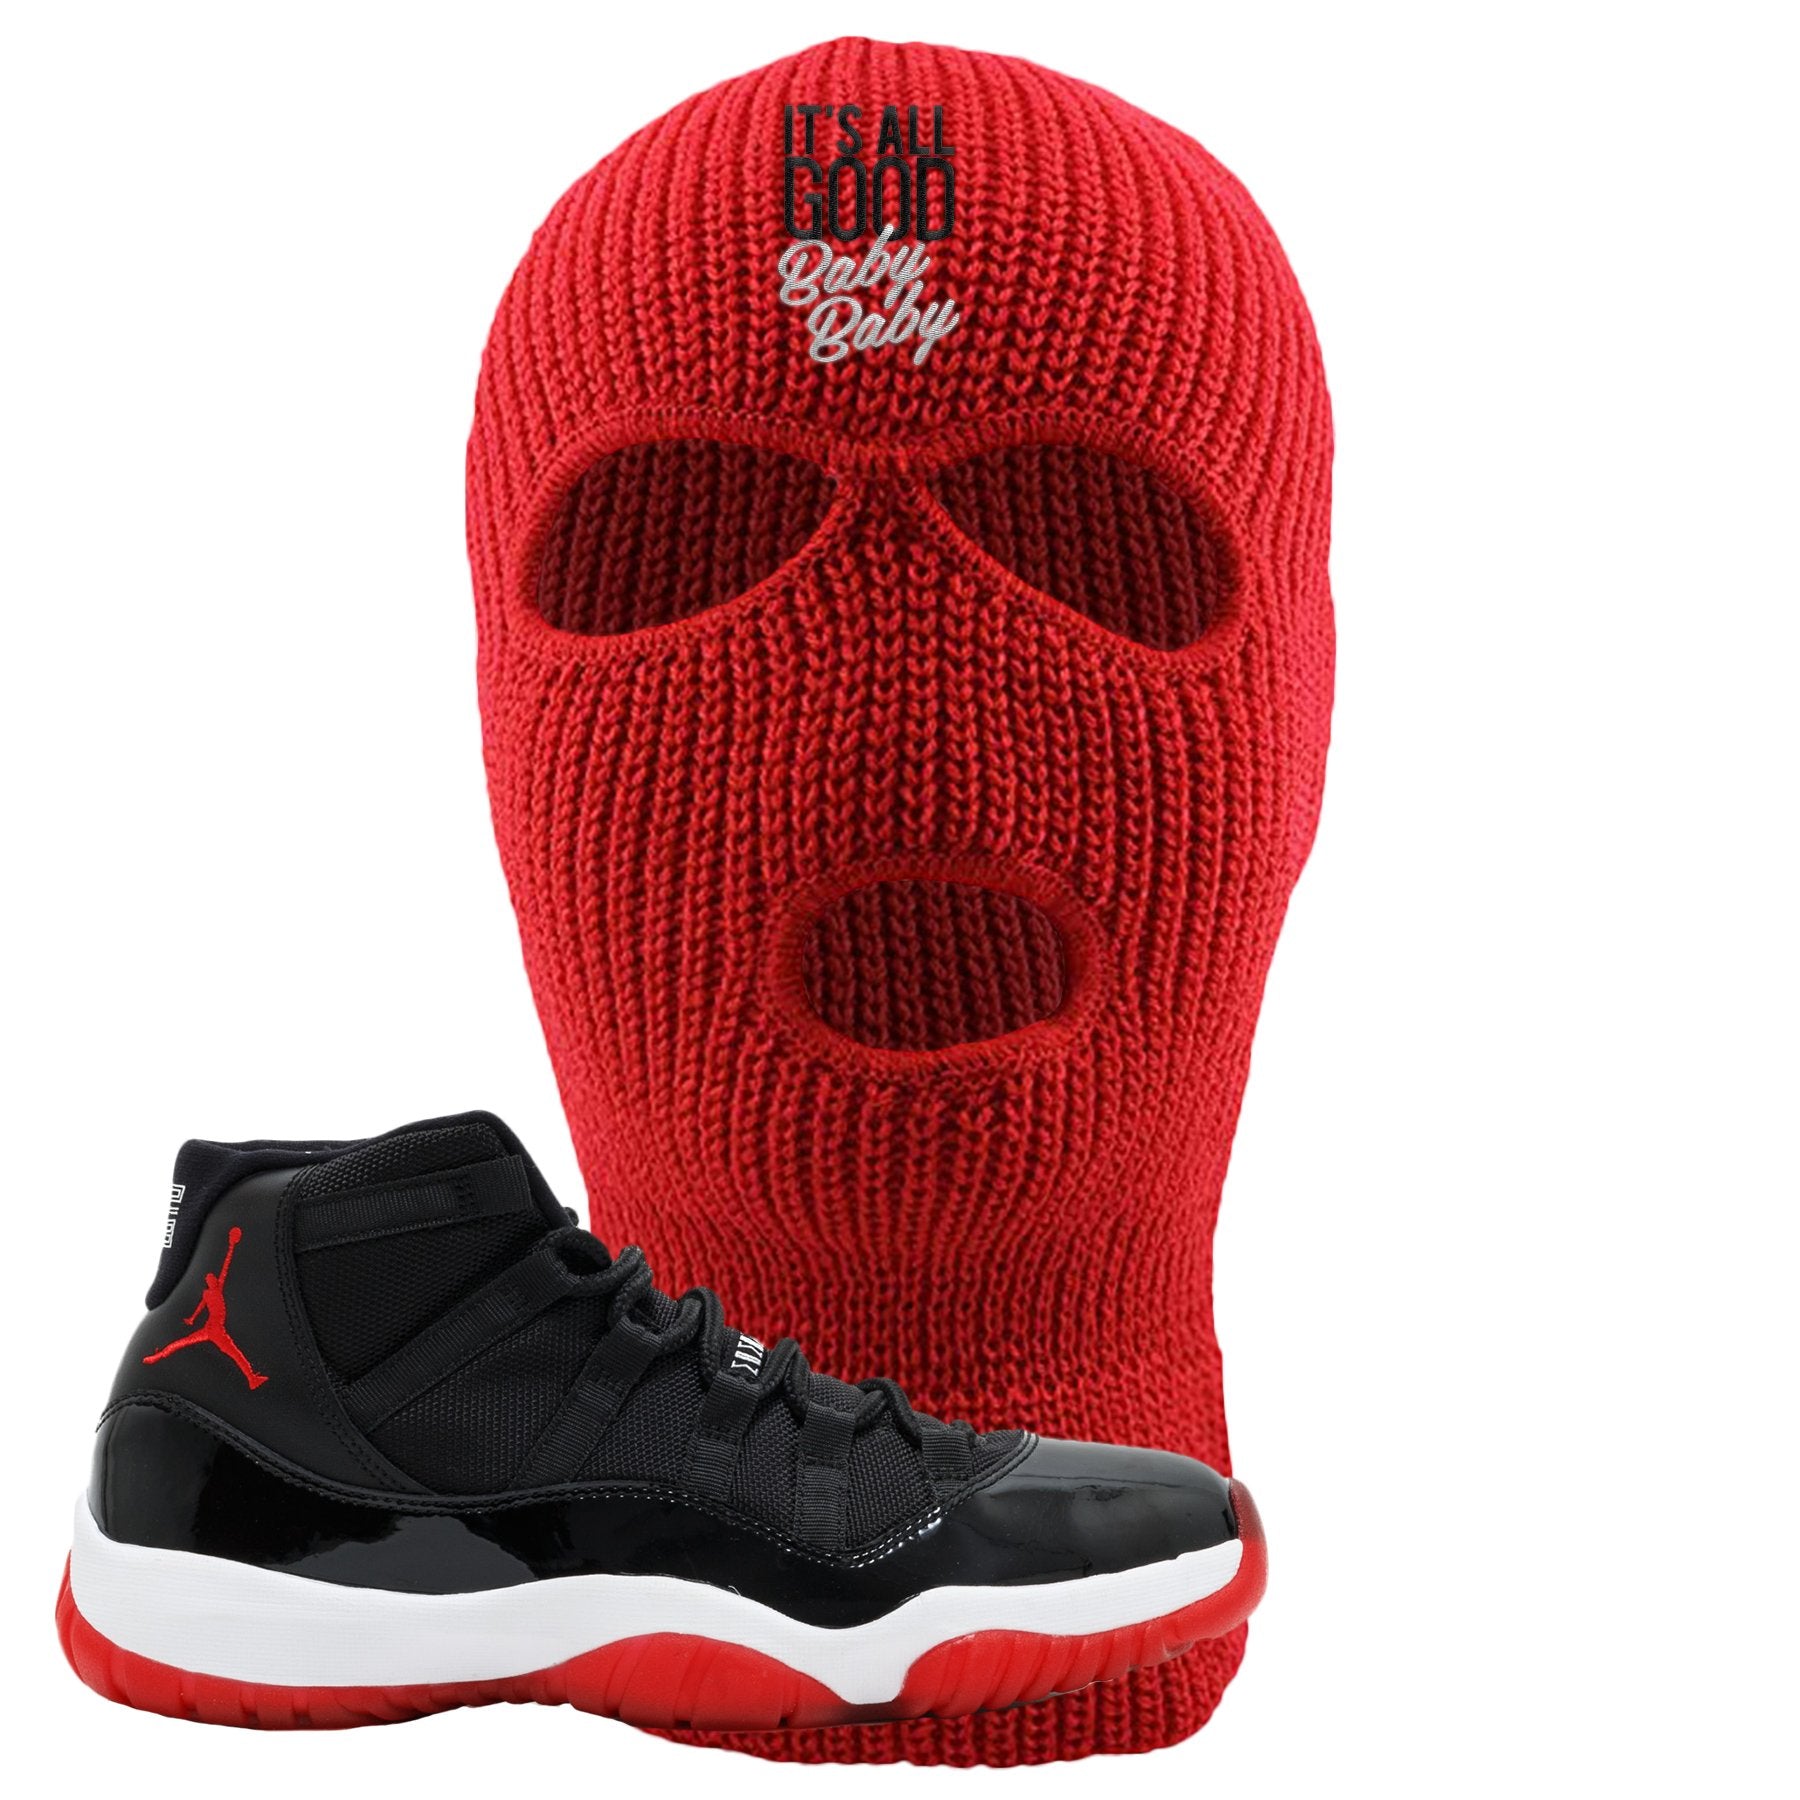 Jordan 11 Bred It Was All Good Baby Baby Red Sneaker Matching Ski Mask